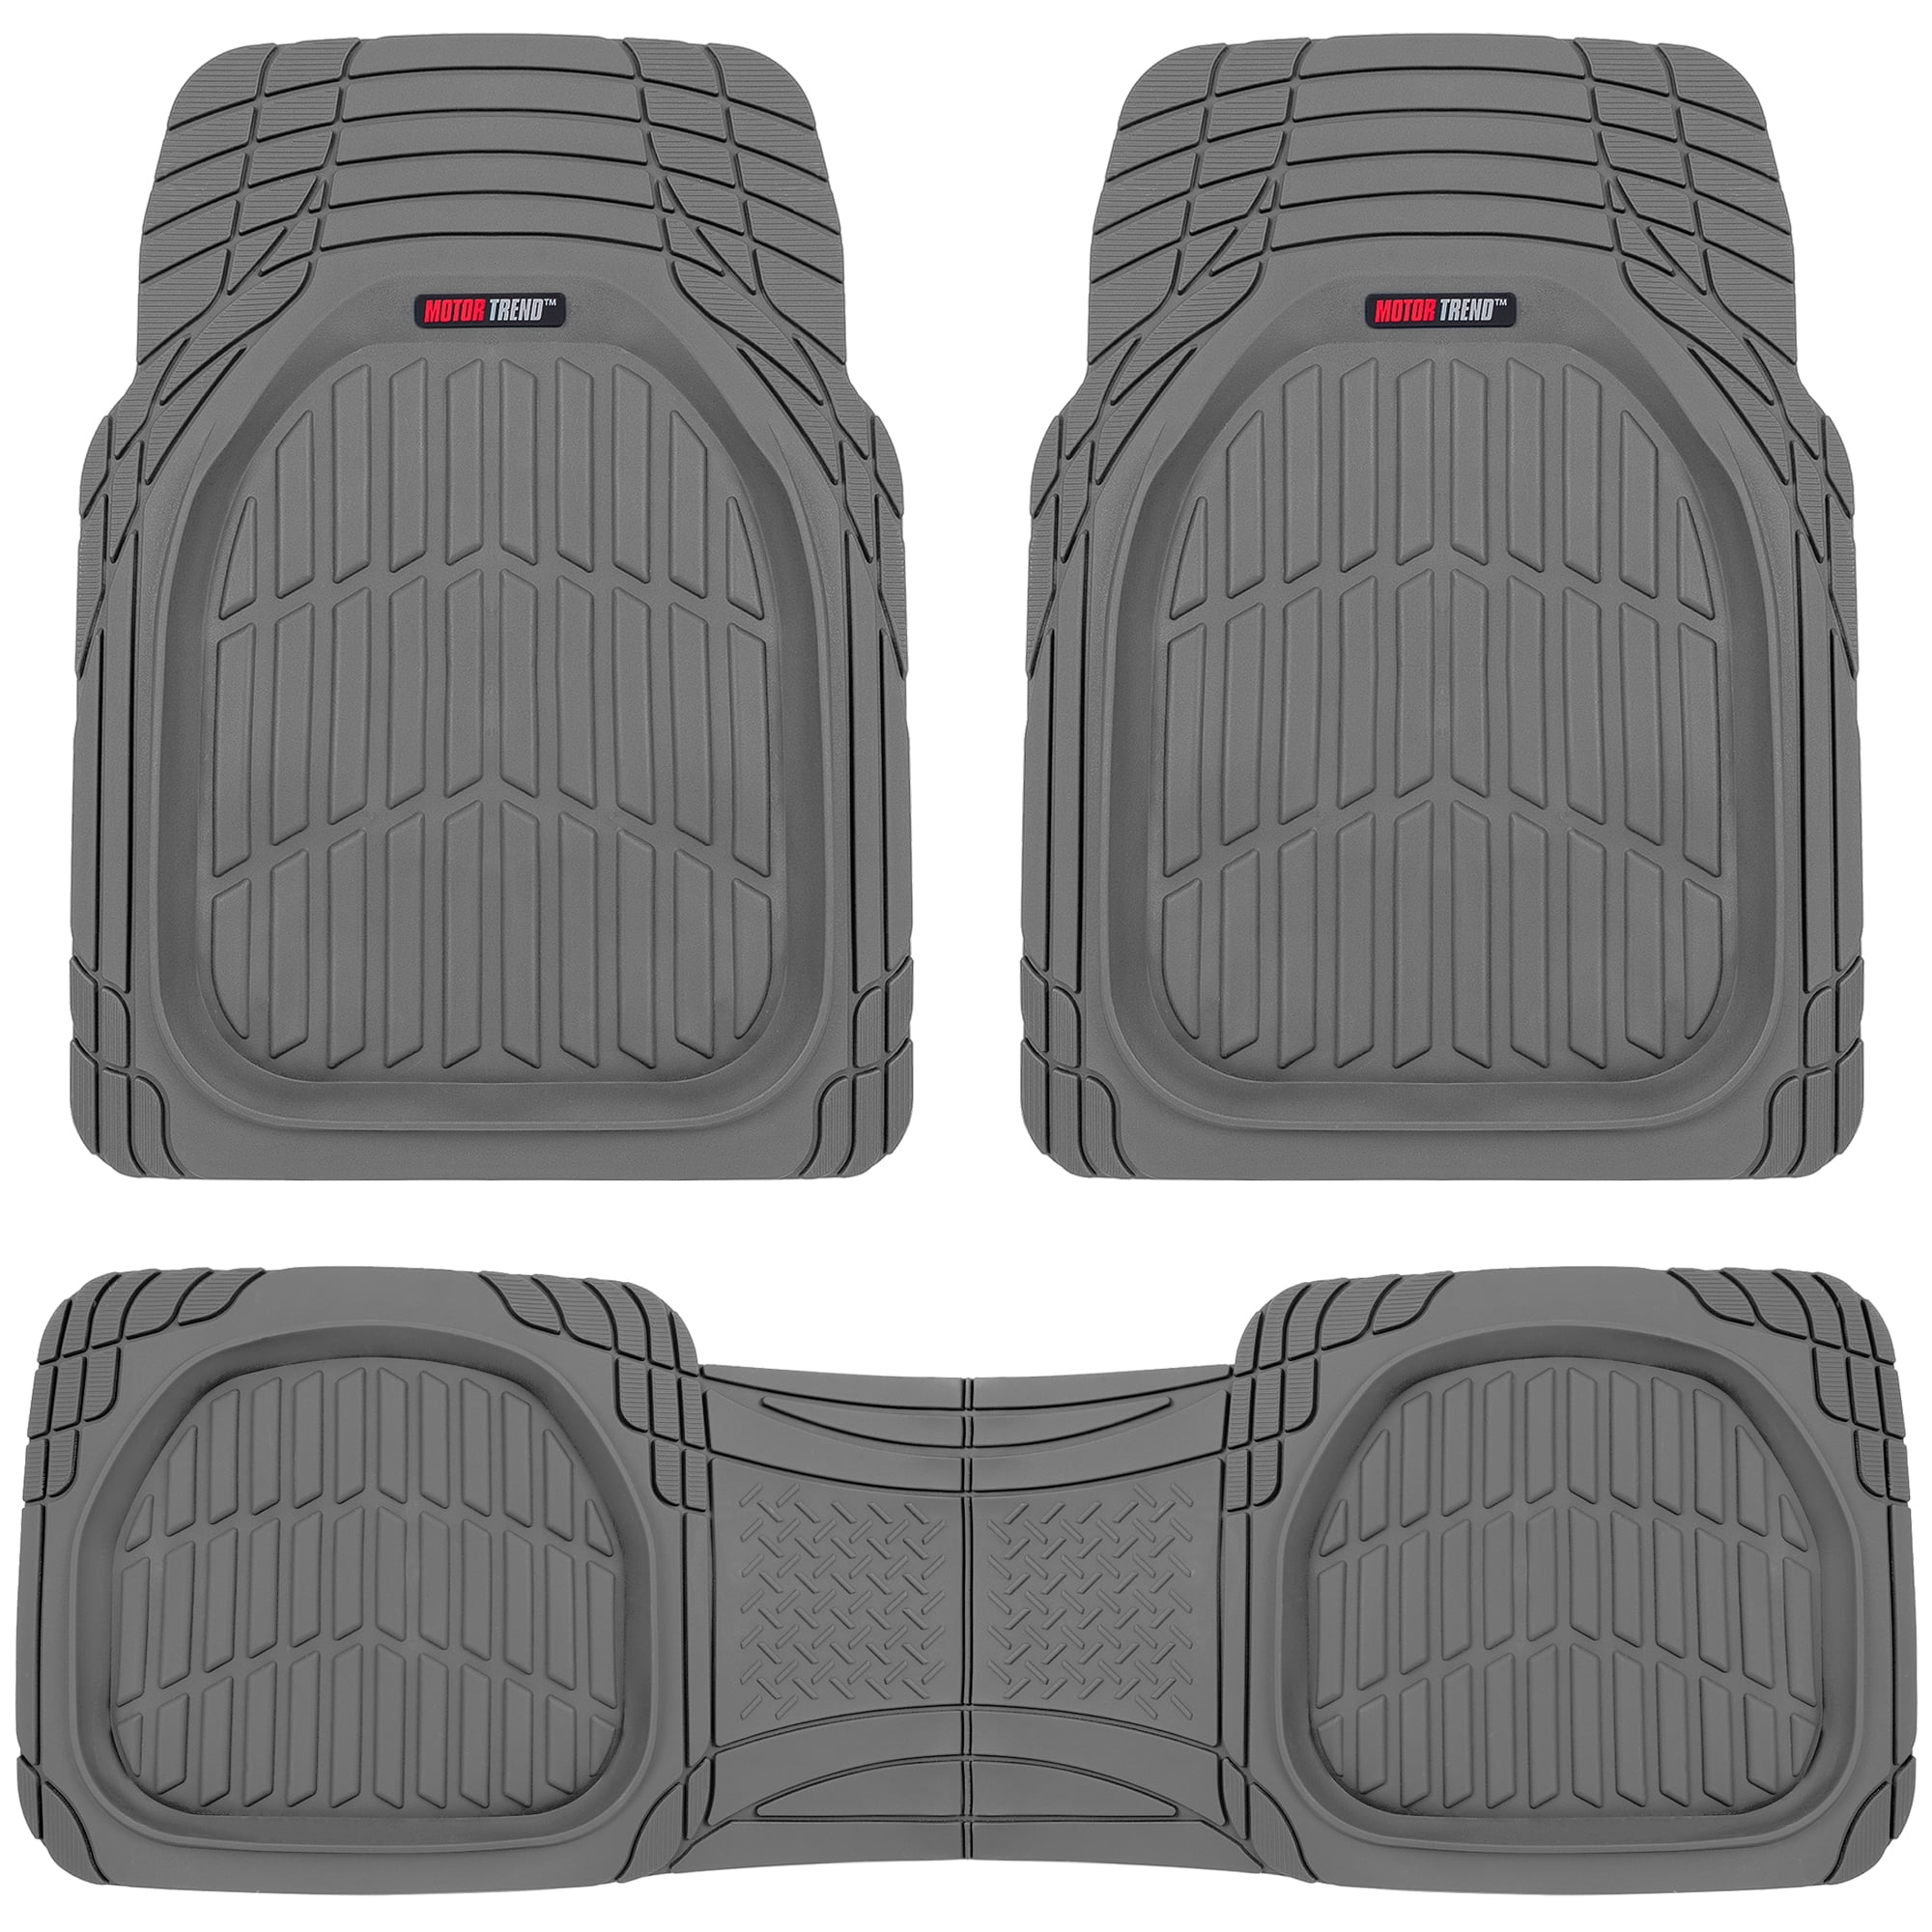 Dash Mat Gray Trunk Cargo Liner Mat All Weather Protection for Car SUV Van W